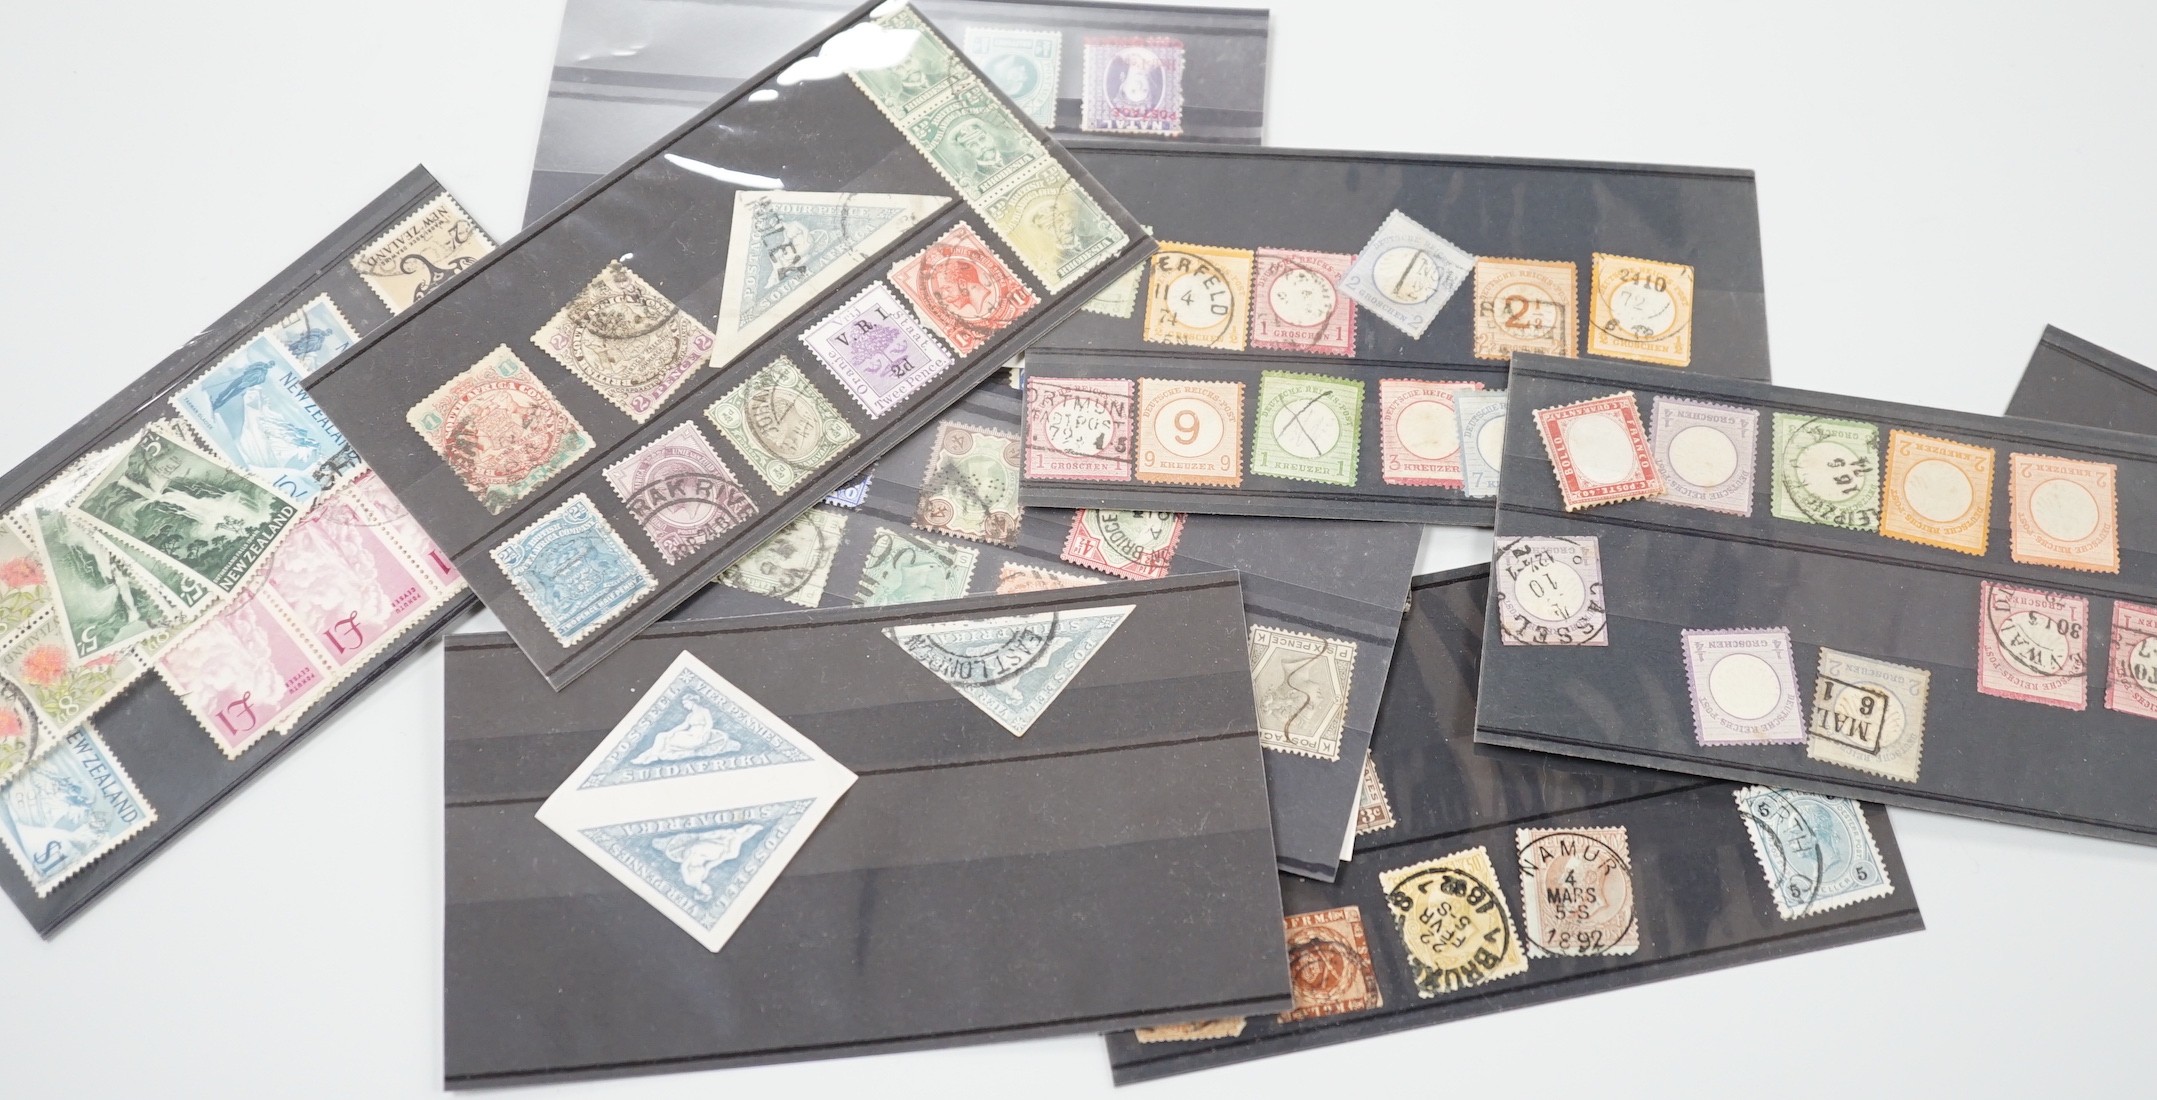 Mixed stamps including Penny Black, Edward VIII 3 shilling booklet, some on stock cards, others mounted